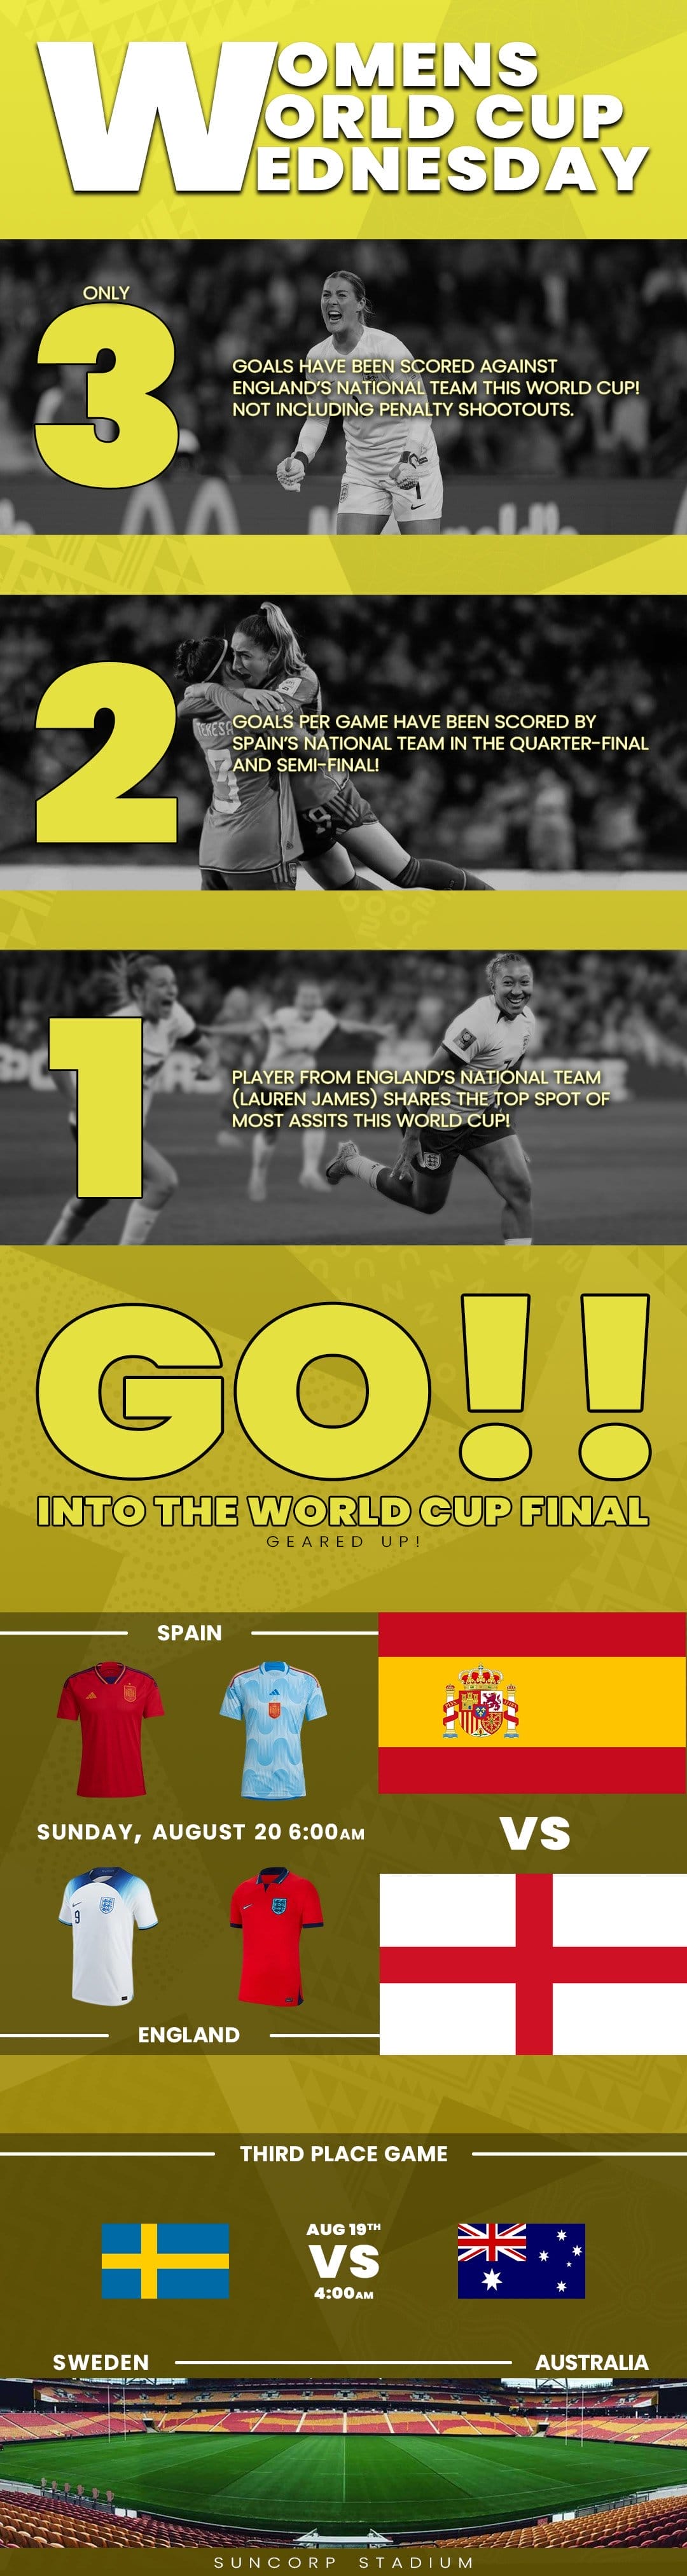 WOMENS WORLD CUP WEDNESDAY ONLY 3 GOALS HAVE BEEN SCORED AGAINST ENGLAND'S NATIONAL TEAM THIS WORLD CUP! NOT INCLUDING PENALTY SHOOTOUTS. 2 GOALS PER GAME HAVE BEEN SCORED BY SPAIN'S NATIONAL TEAM IN THE QUARTER -FINAL AND SEMI-FINAL PLAYER FROM ENGLAND'S NATIONAL TEAM (LAUREN JAMES) SHARES THE TOP SPOT OF MOST ASSISTS THIS WORLD CUP! GO!! INTO THE WORLD CUP FINAL GEARED UP! SPAIN SUNDAY, AUGUST 20 6:00 AM VS ENGLAND THIRD PLACE GAME AUGUST 19TH 4:00 AM SWEDEN VS AUSTRALIA